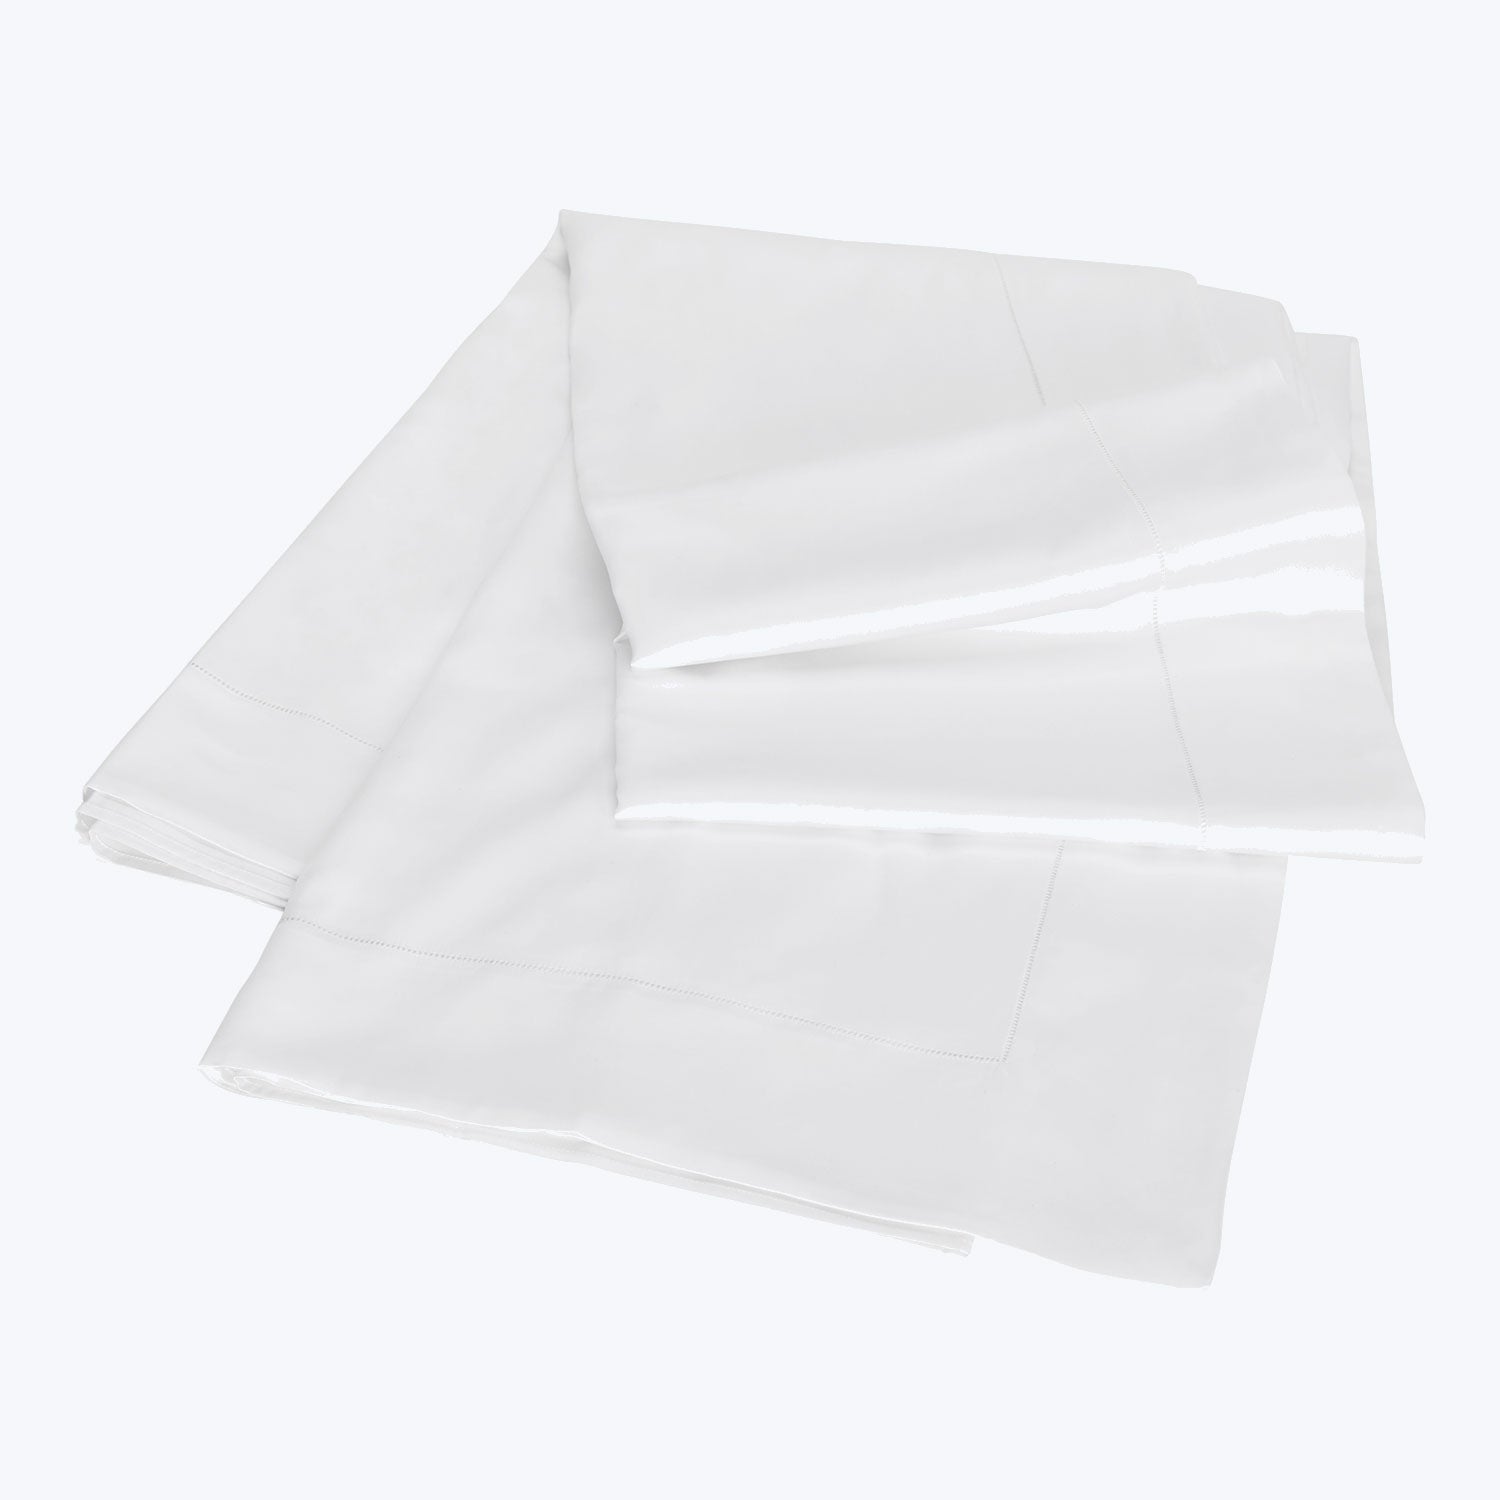 Simple and versatile white bed linens neatly folded and soft.